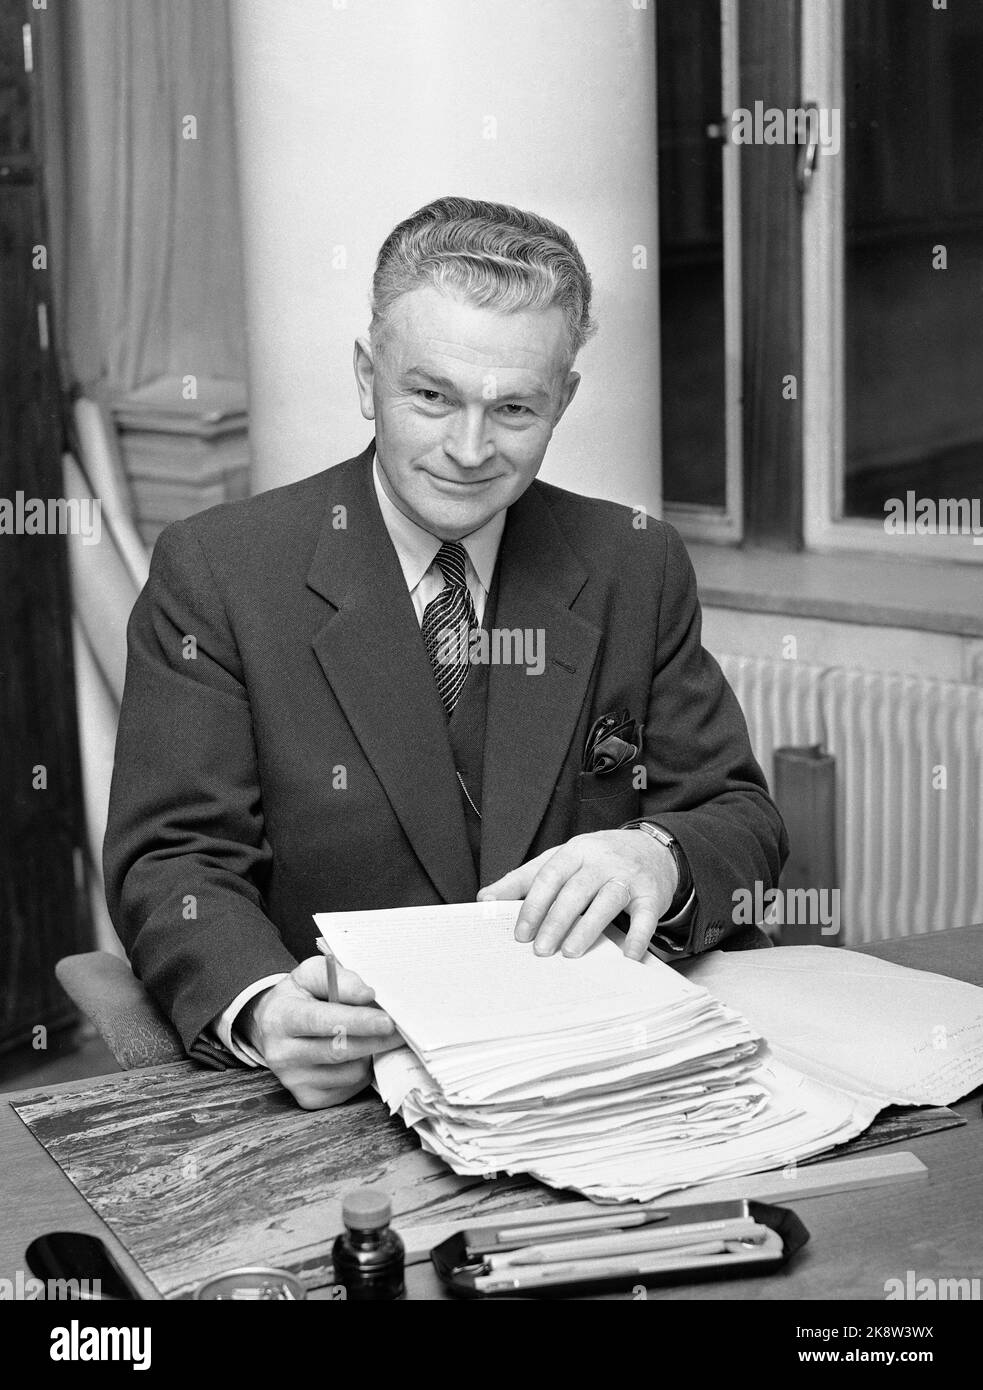 Oslo 19570219 Schei Committee leader Nikolai Schei at the desk with documents. The Schei Committee was reduced to investigate the advantages and disadvantages of merging municipalities in Norway. Their attitude was that the merger was predominantly favorable for small municipalities, with the recommendation facing hard resistance in the relevant municipalities. Nevertheless, the number of municipalities was cut down from well over 700 to around 450 during the 60s. Photo: NTB / NTB Stock Photo